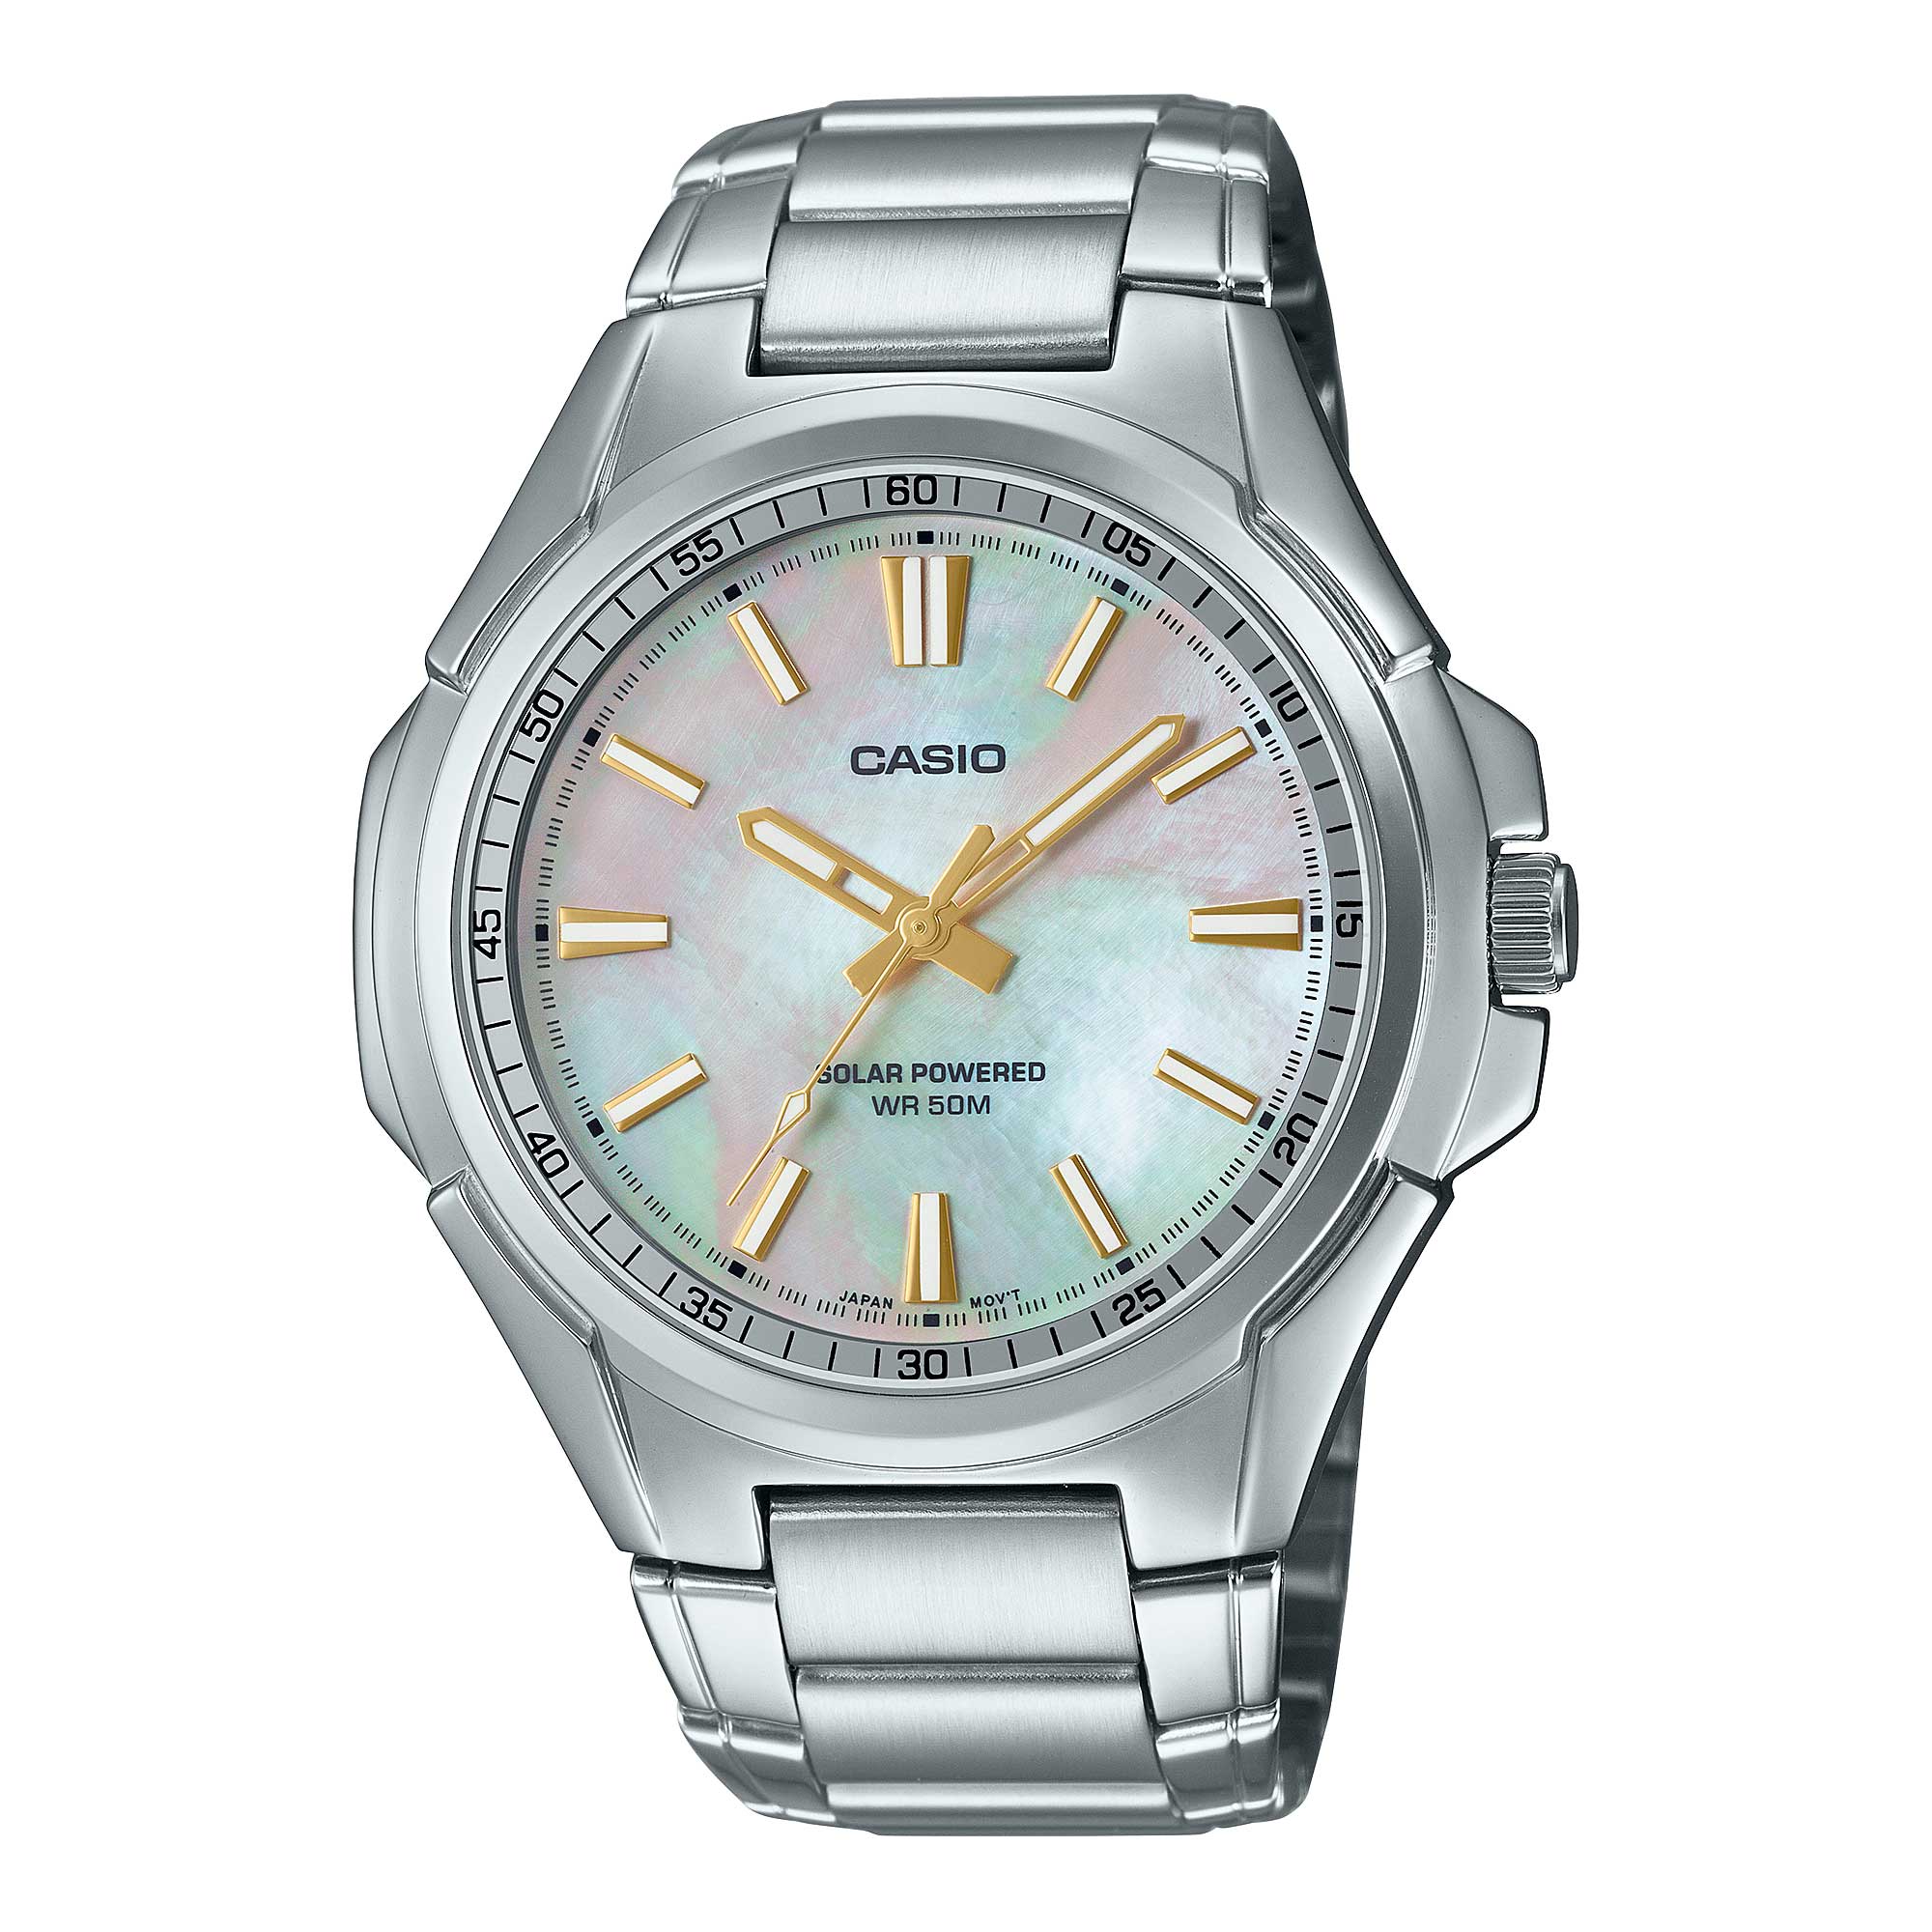 Casio Men's Analog Solar Powered Mother of Pearl Dial Watch MTPRS100S-7A MTP-RS100S-7A